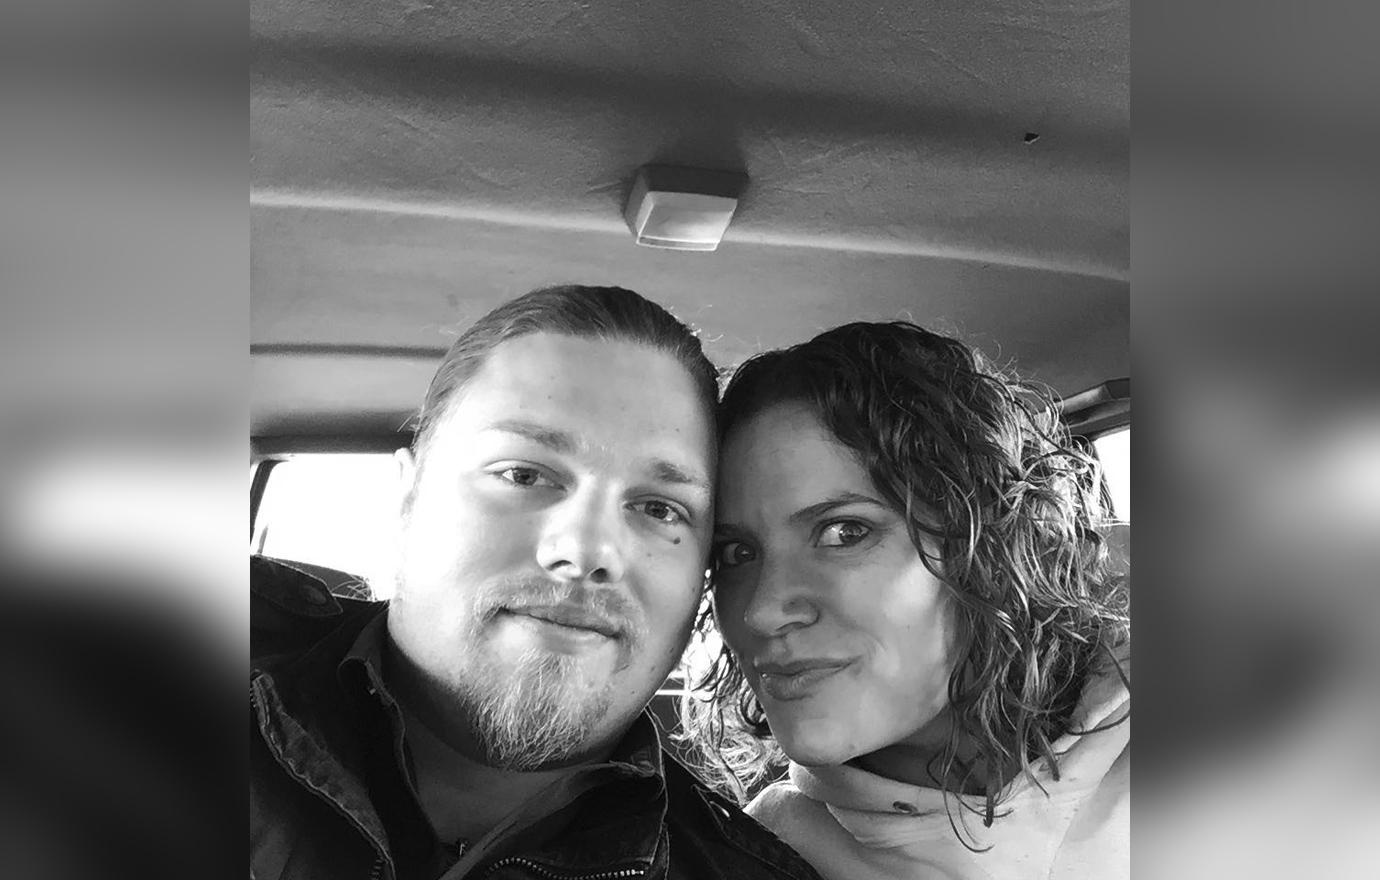 Noah Brown And Rhain Black And White Selfie Inside a Vehicle Smiling